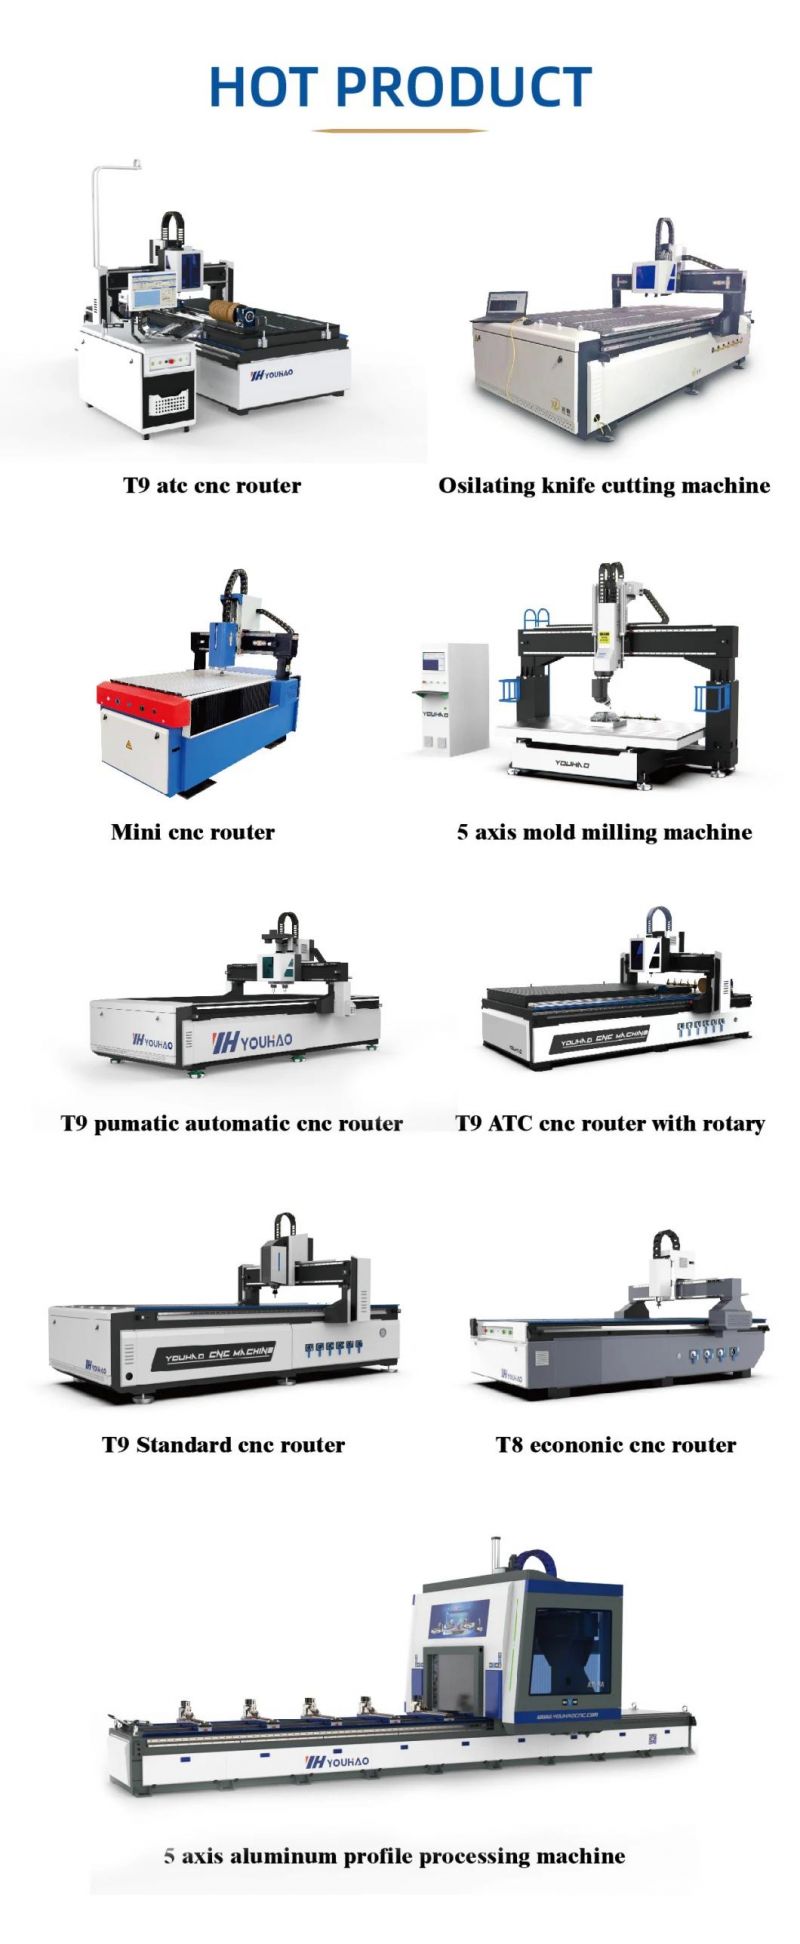 Big Discount Chinese Small 6090 4 Spindle CNC Router Machine Wood Carving Small Router Sale for Woodworking CNC Router Kit 4X8